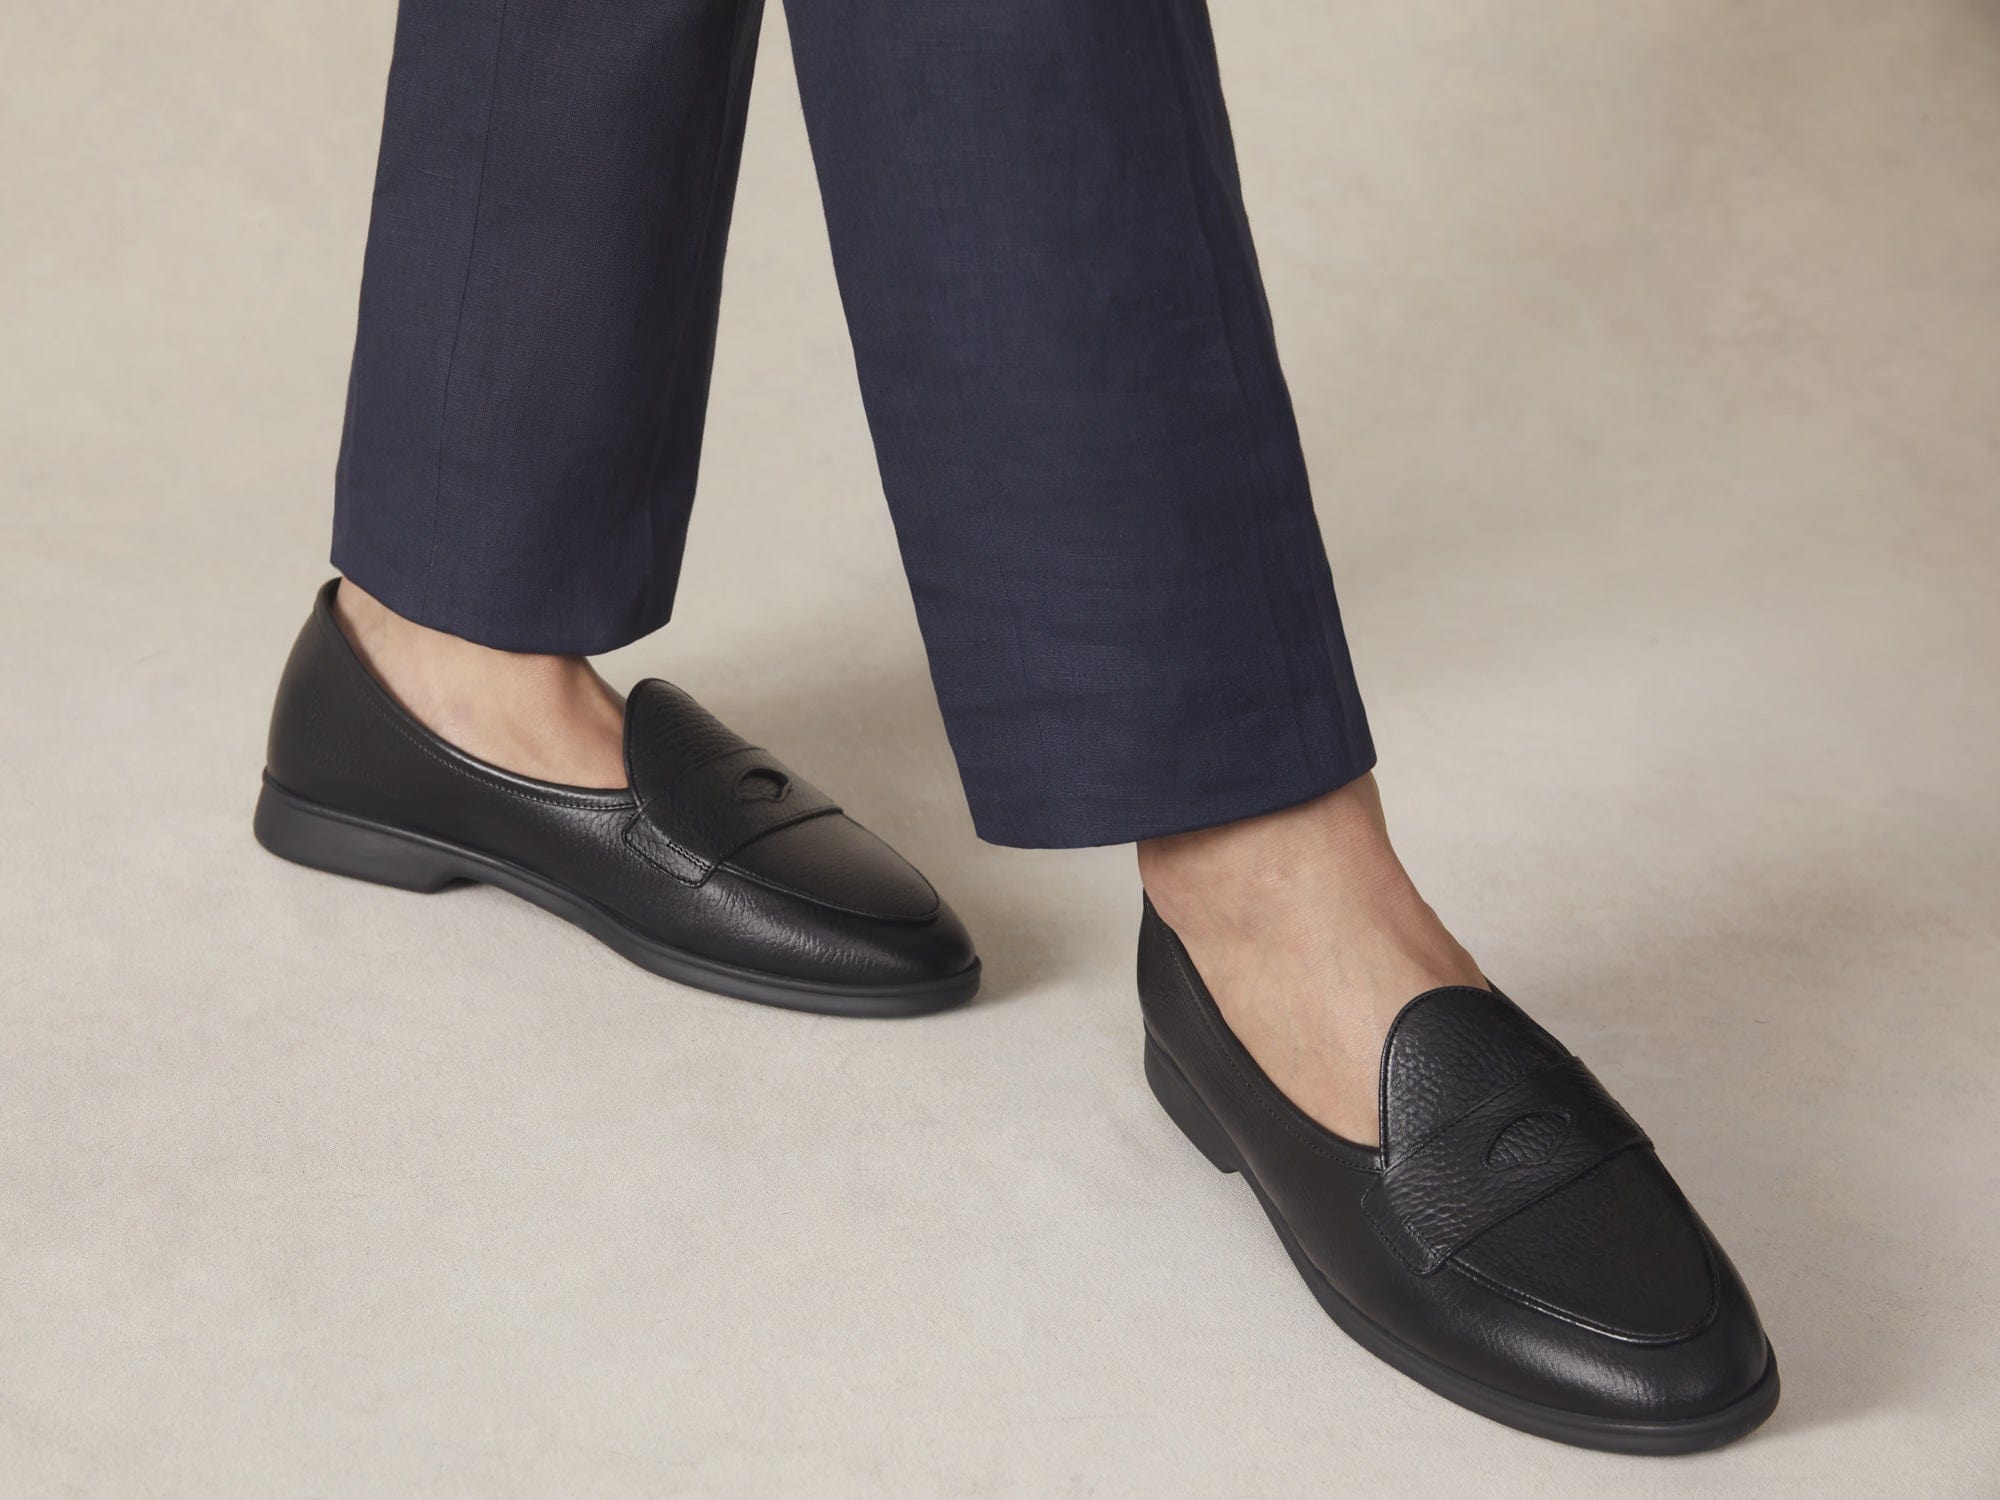 Stride Penny Loafers in Black Moorland Calf